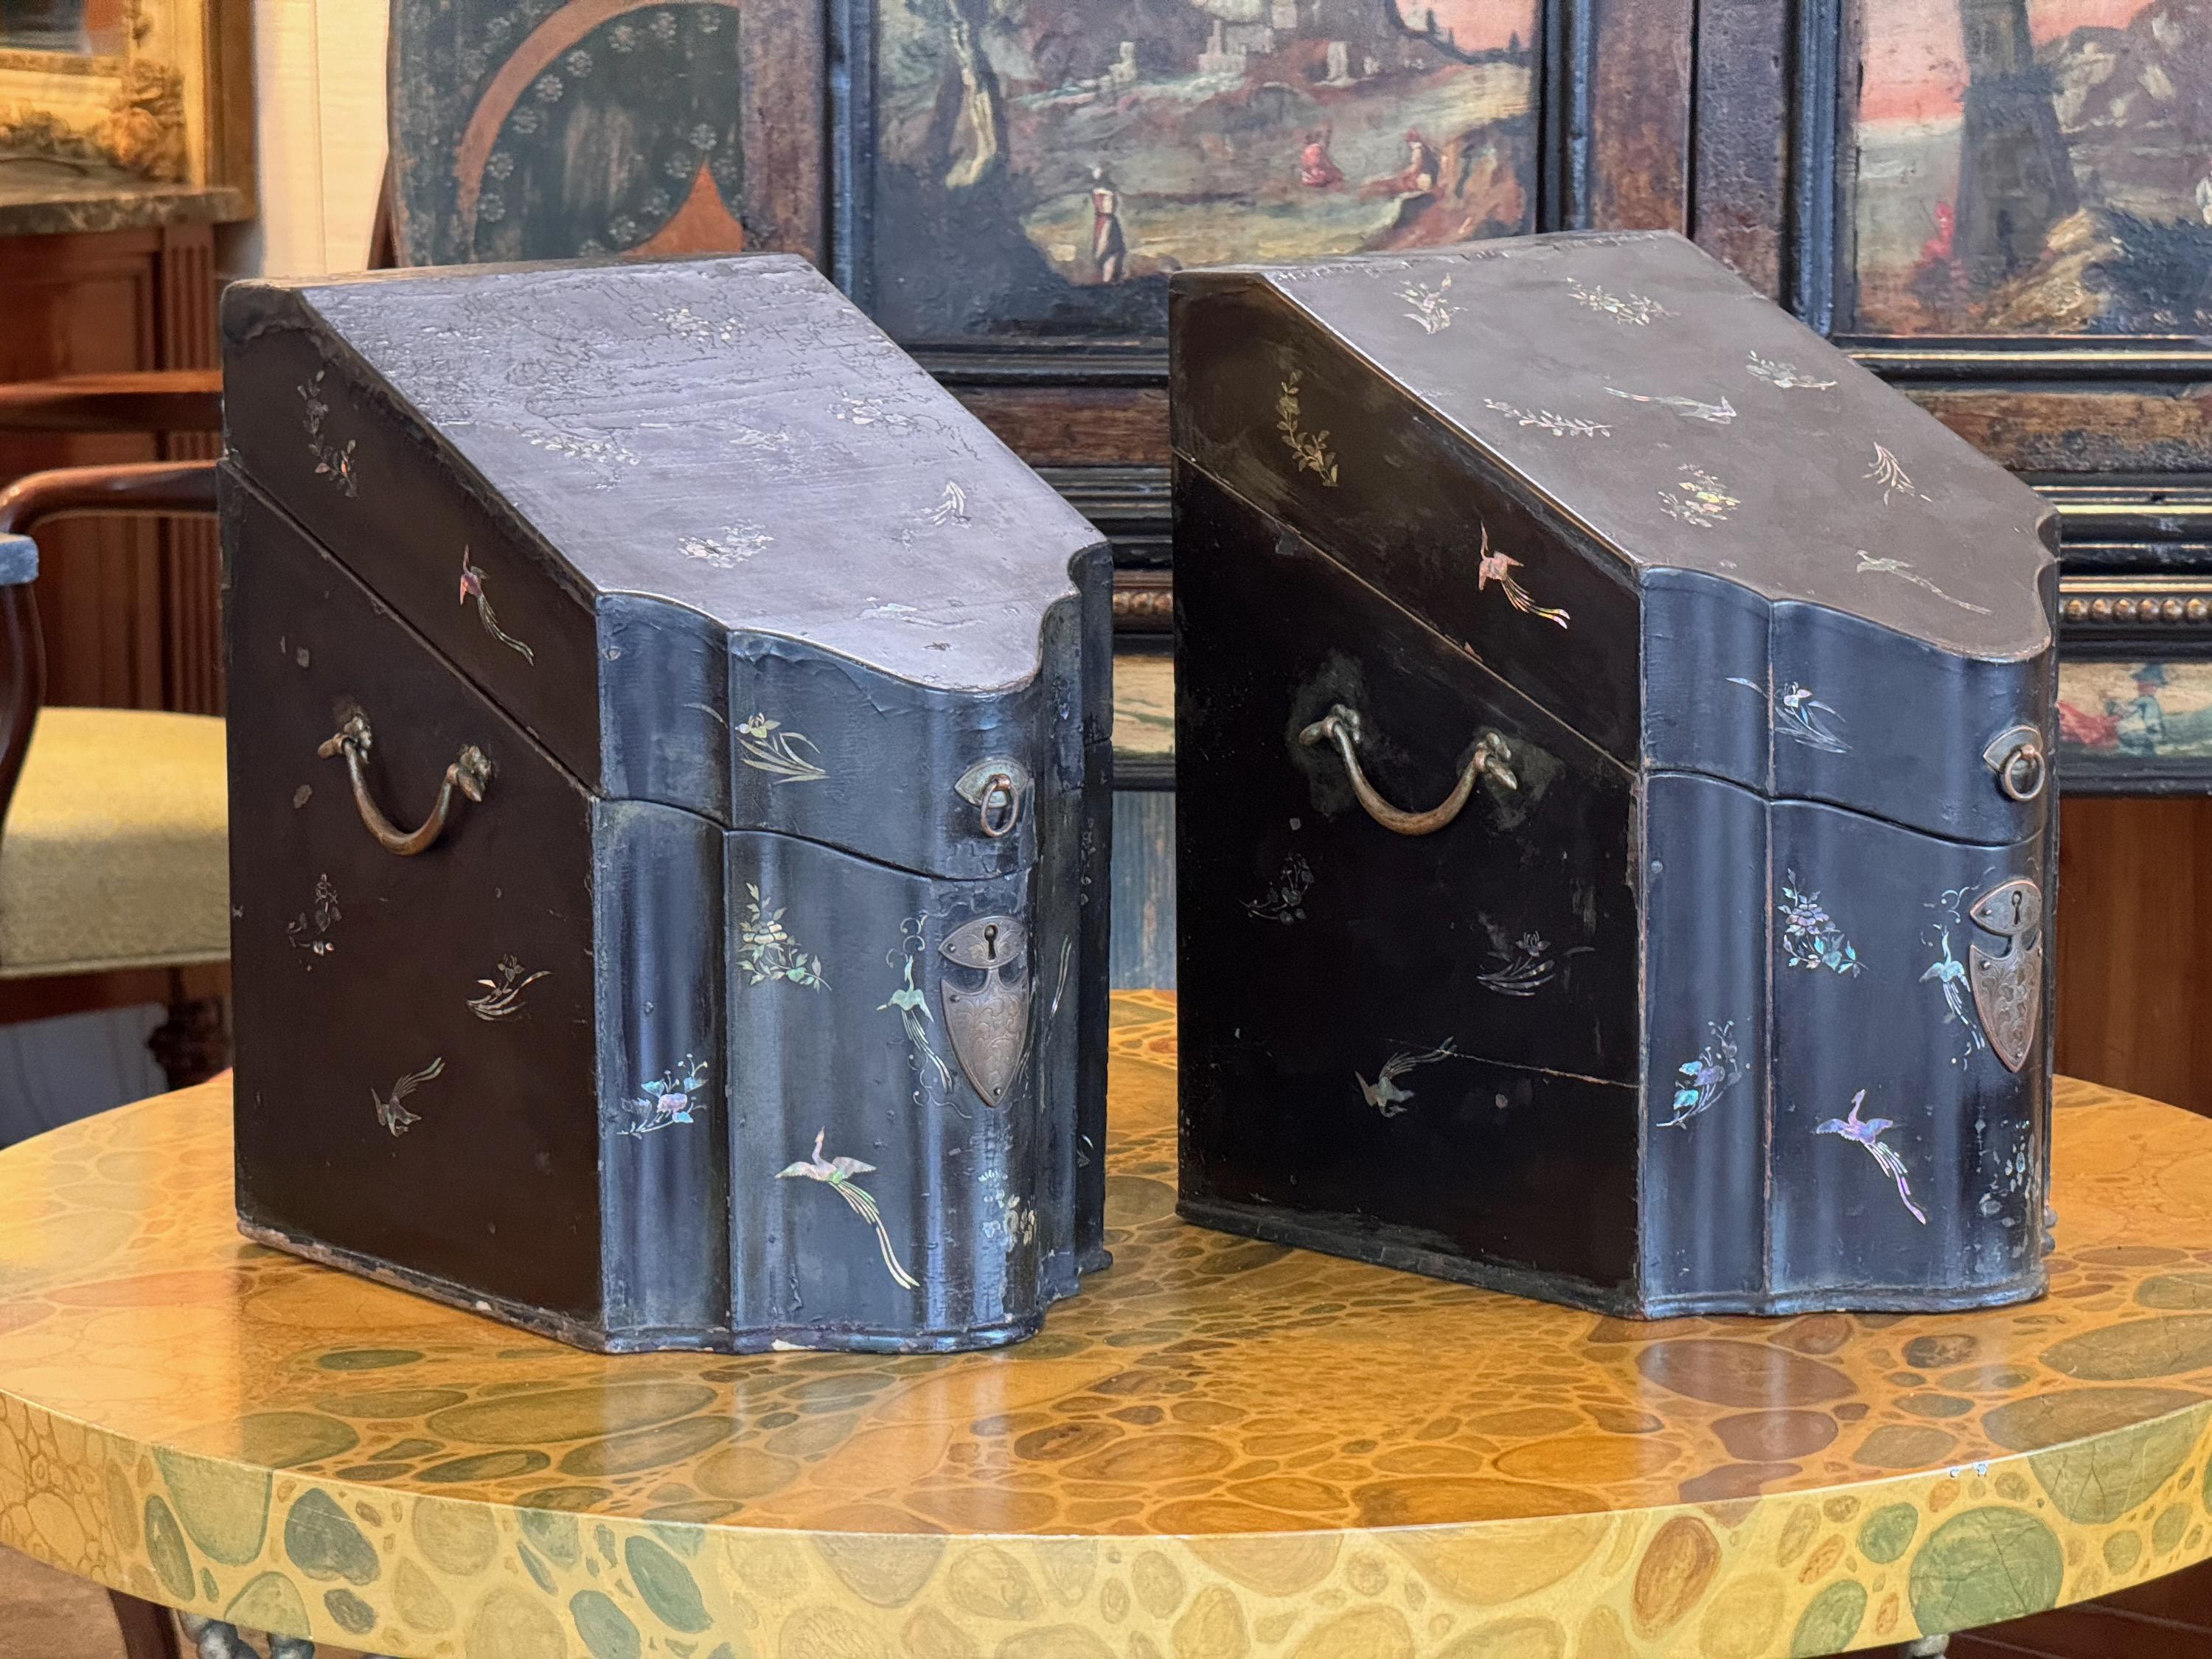 A most unusual pair of knife boxes. Beautiful decoration.